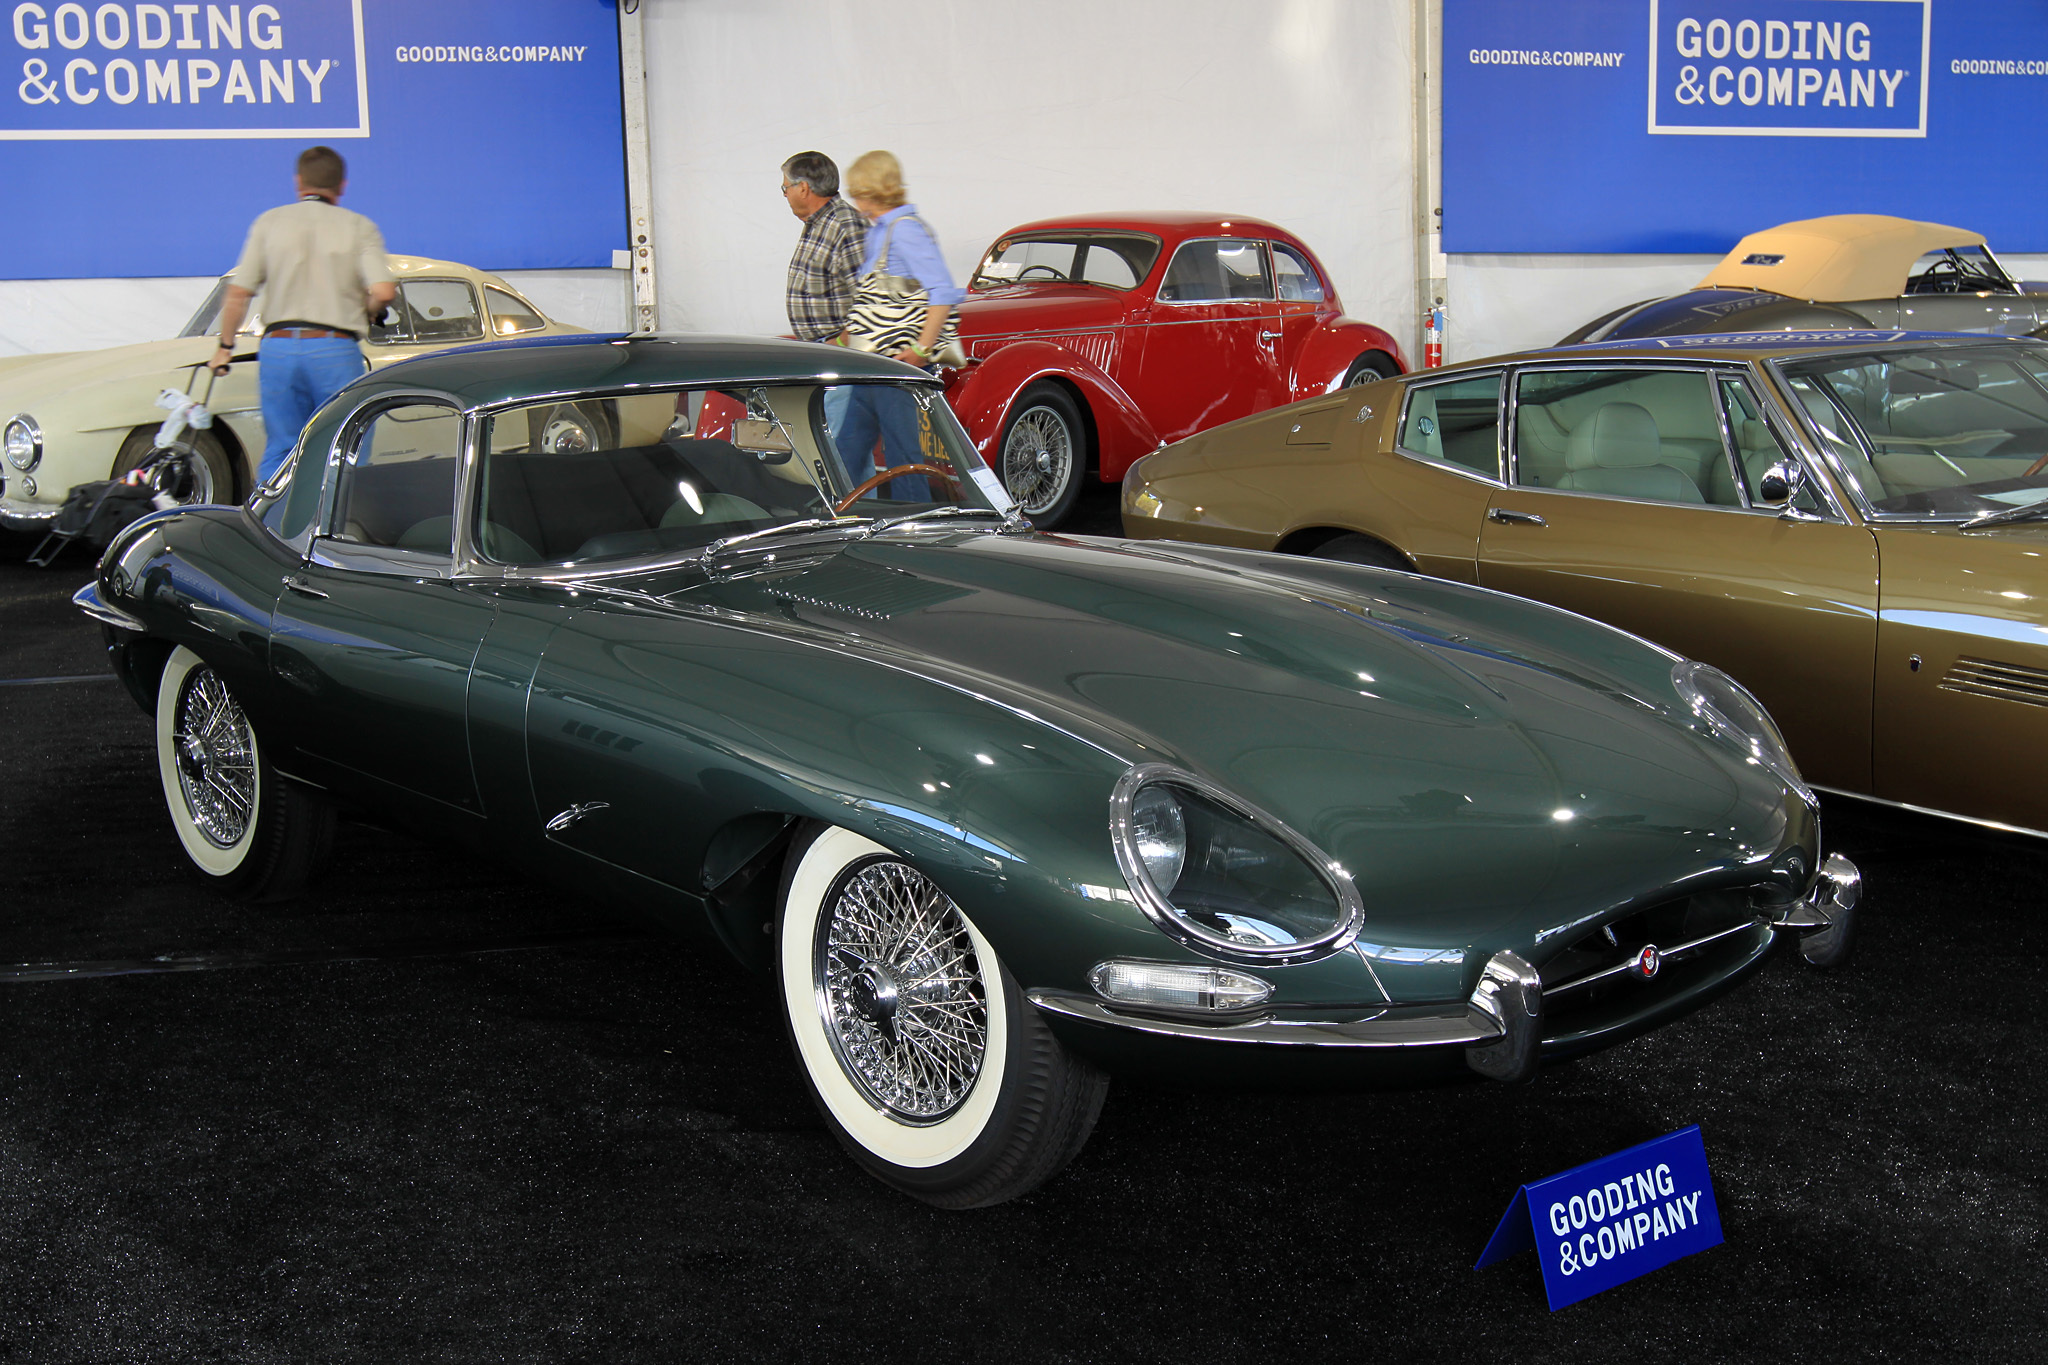 1961 Jaguar E-Type Series 1 3.8-Litre Roadster 875038 - sold for $528,000 at Gooding and Company. The Most Collectible Example of Jaguar’s Iconic 1960s Sports Car. The 38th Left-Hand-Drive E-Type Roadster Produced. Desirably Equipped with External Bonnet Latches, Flat Floors, and Welded Louvers. Recently Completed Concours-Level Restoration. Accompanied by JDHT Certifcate, Round Tool Kit, Hardtop, and Owner’s Manual.